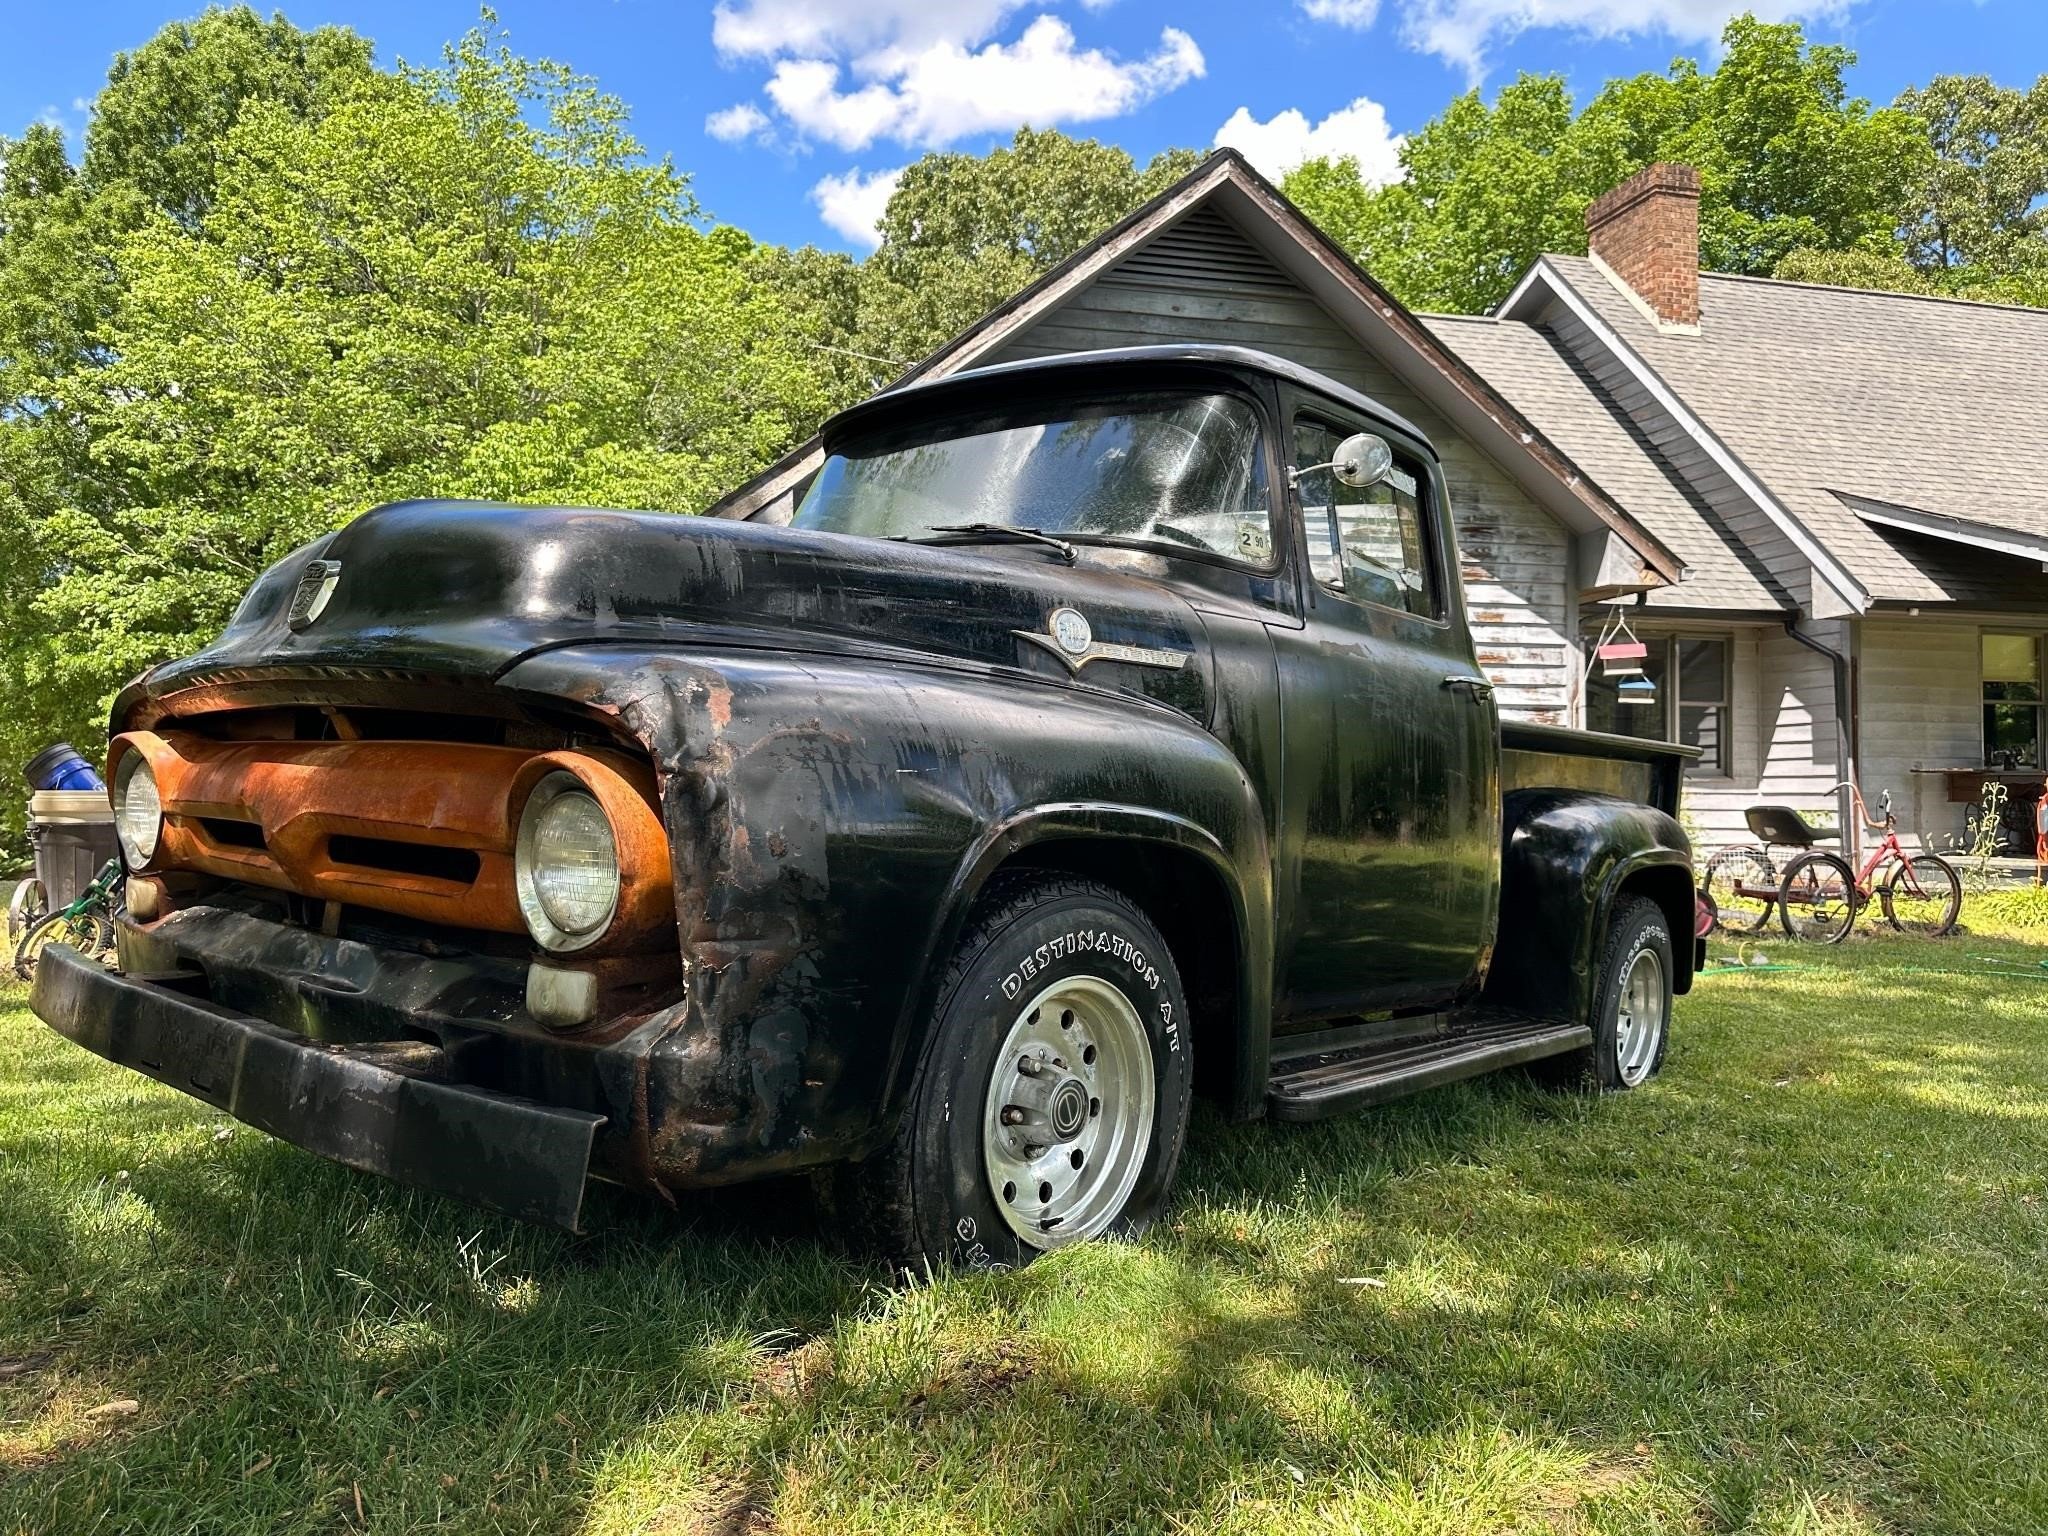 1951 Ford F-100 not running “as is”